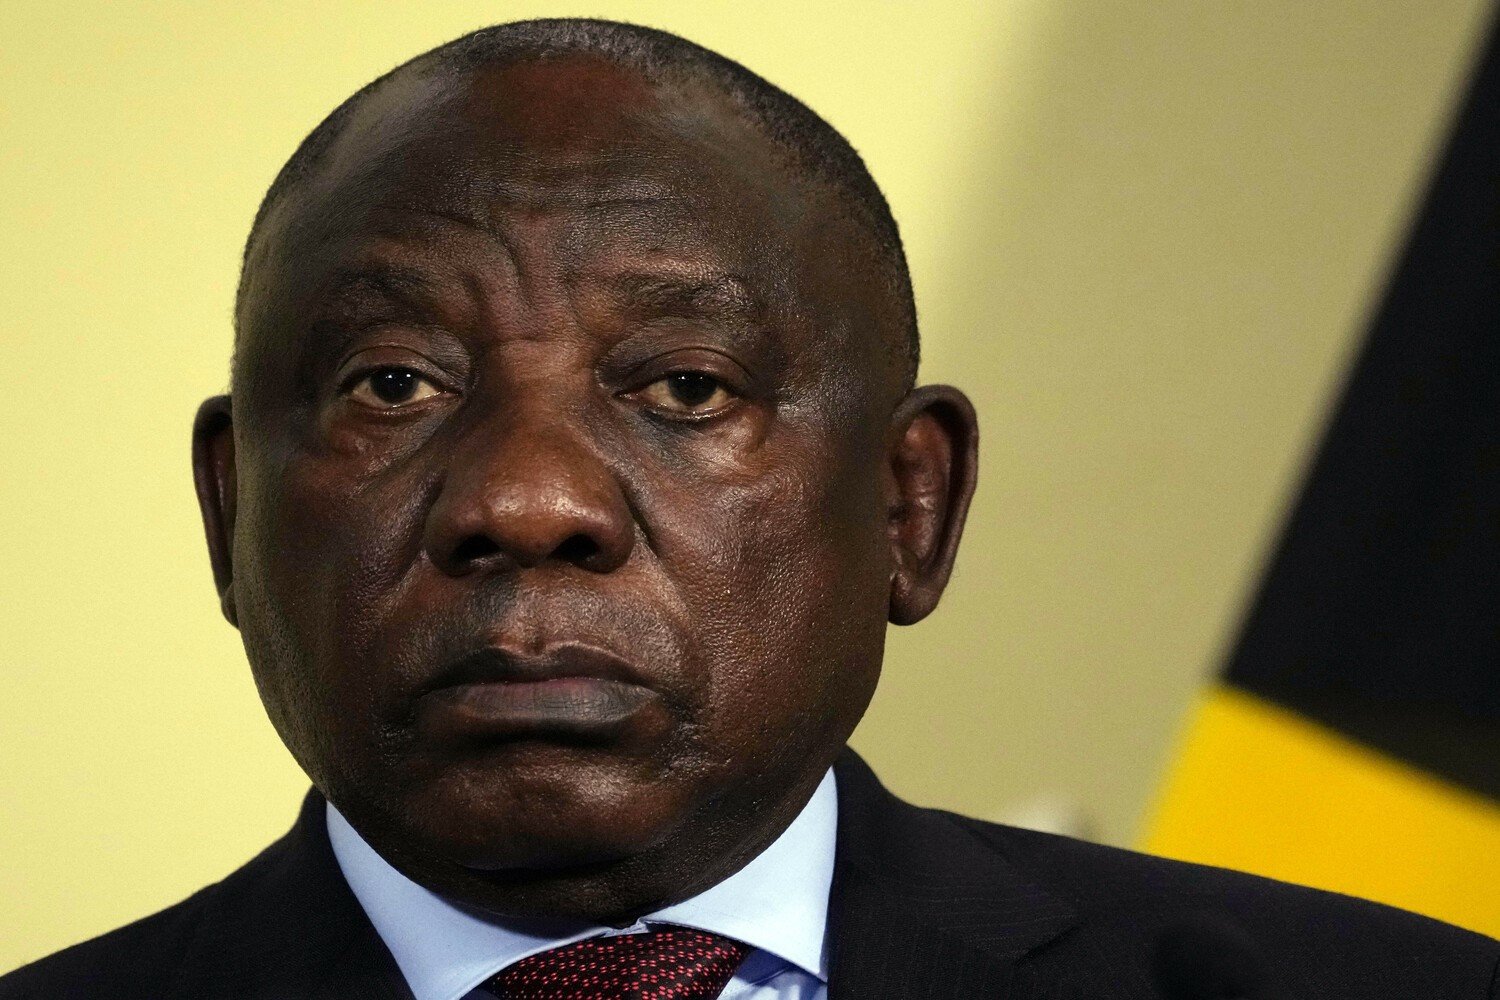 Ramaphosa’s Anti-Graft Credentials Just Took Another Hit at a Bad Time